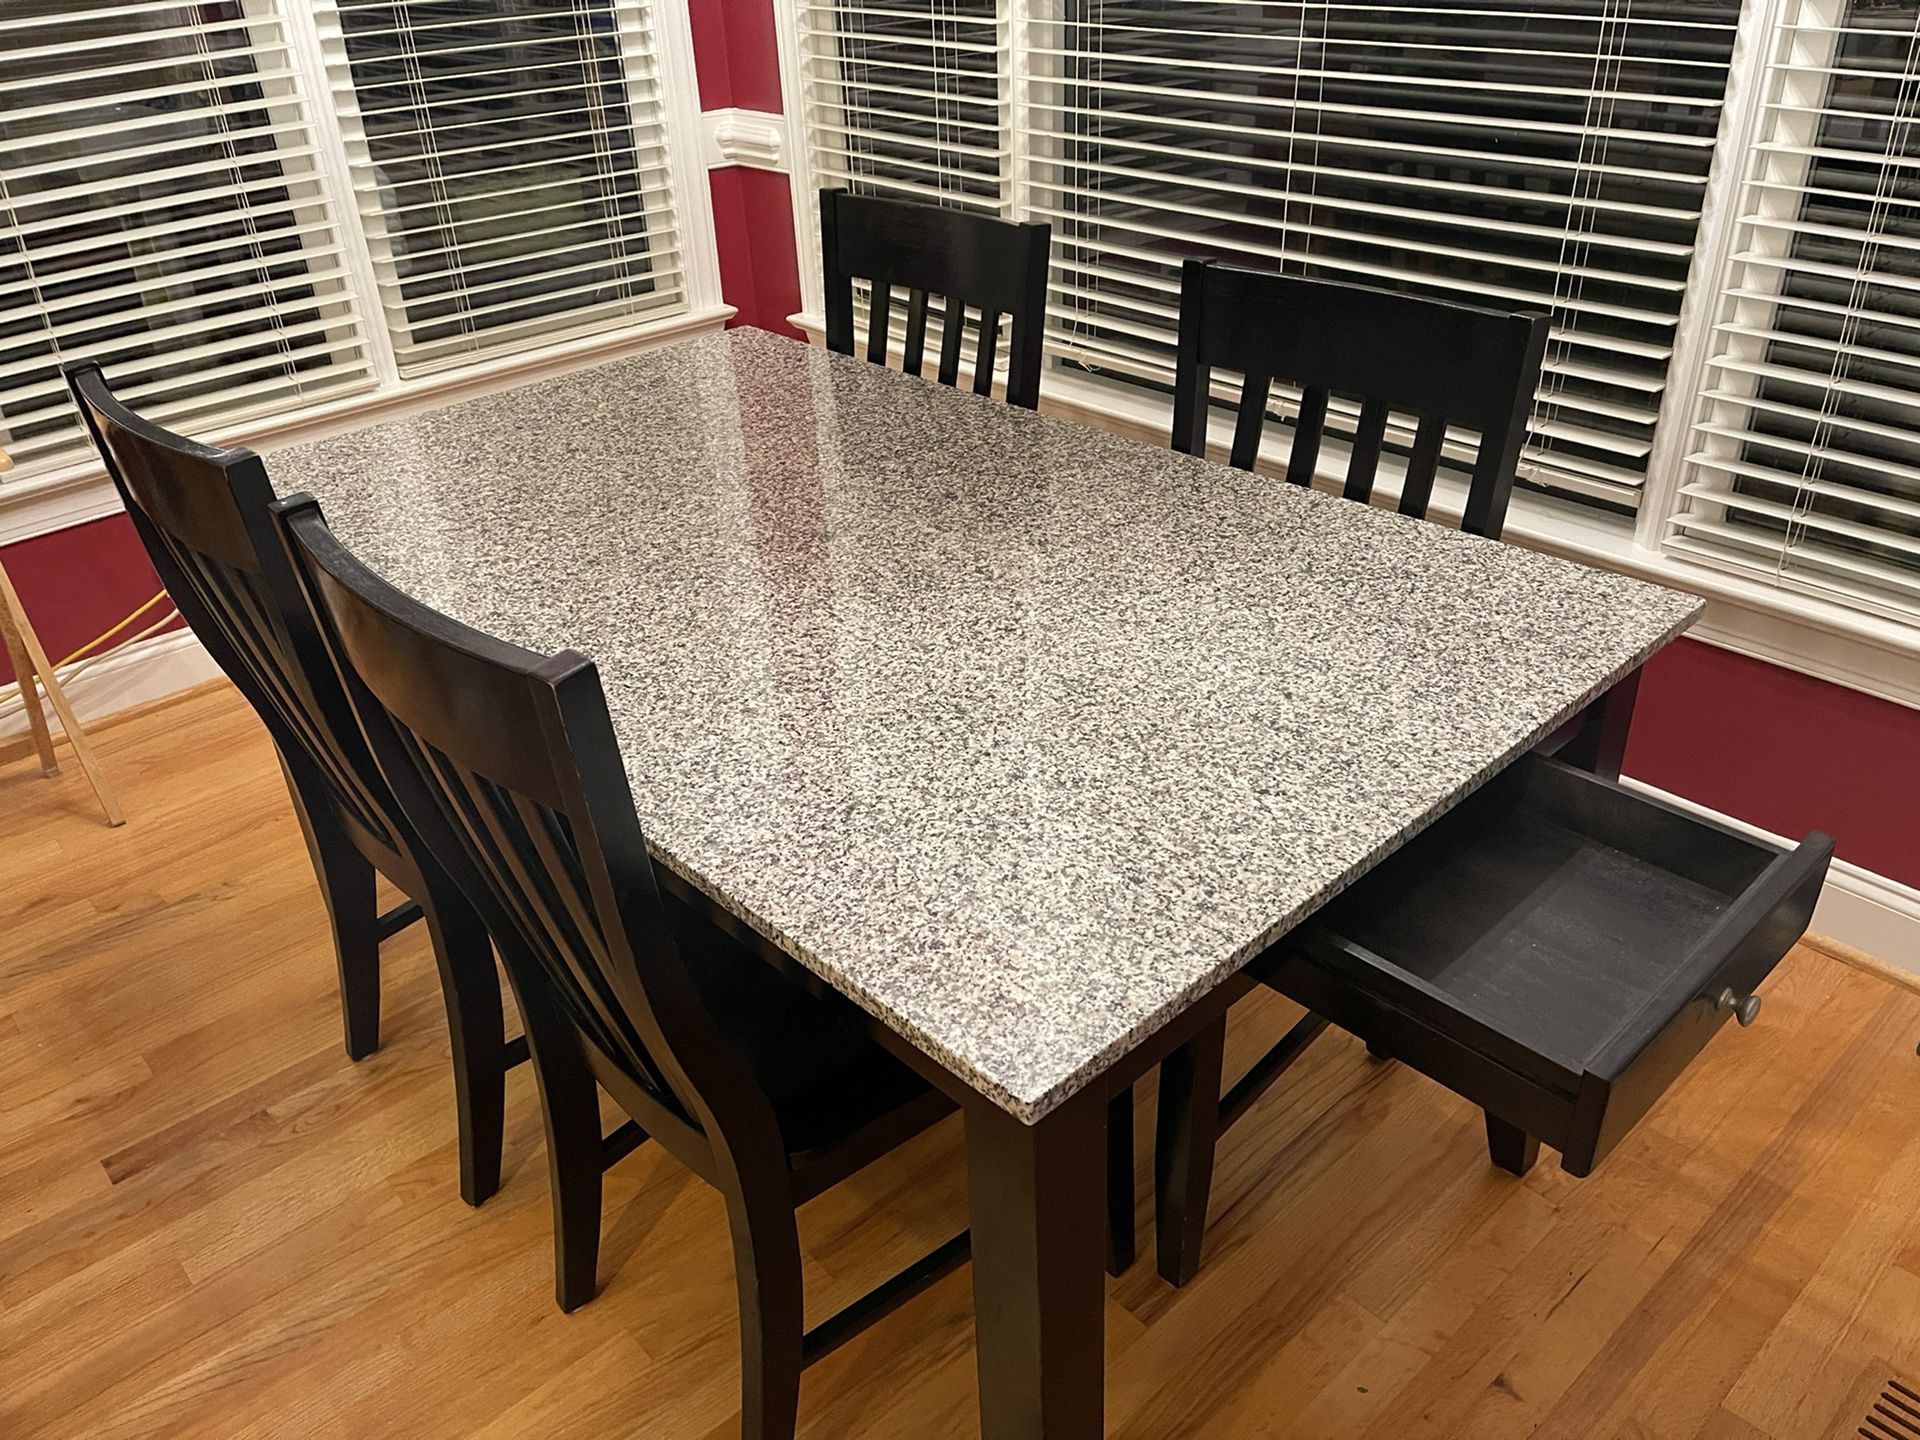 Granite Top Kitchen Table, 4 Chairs, 36x60